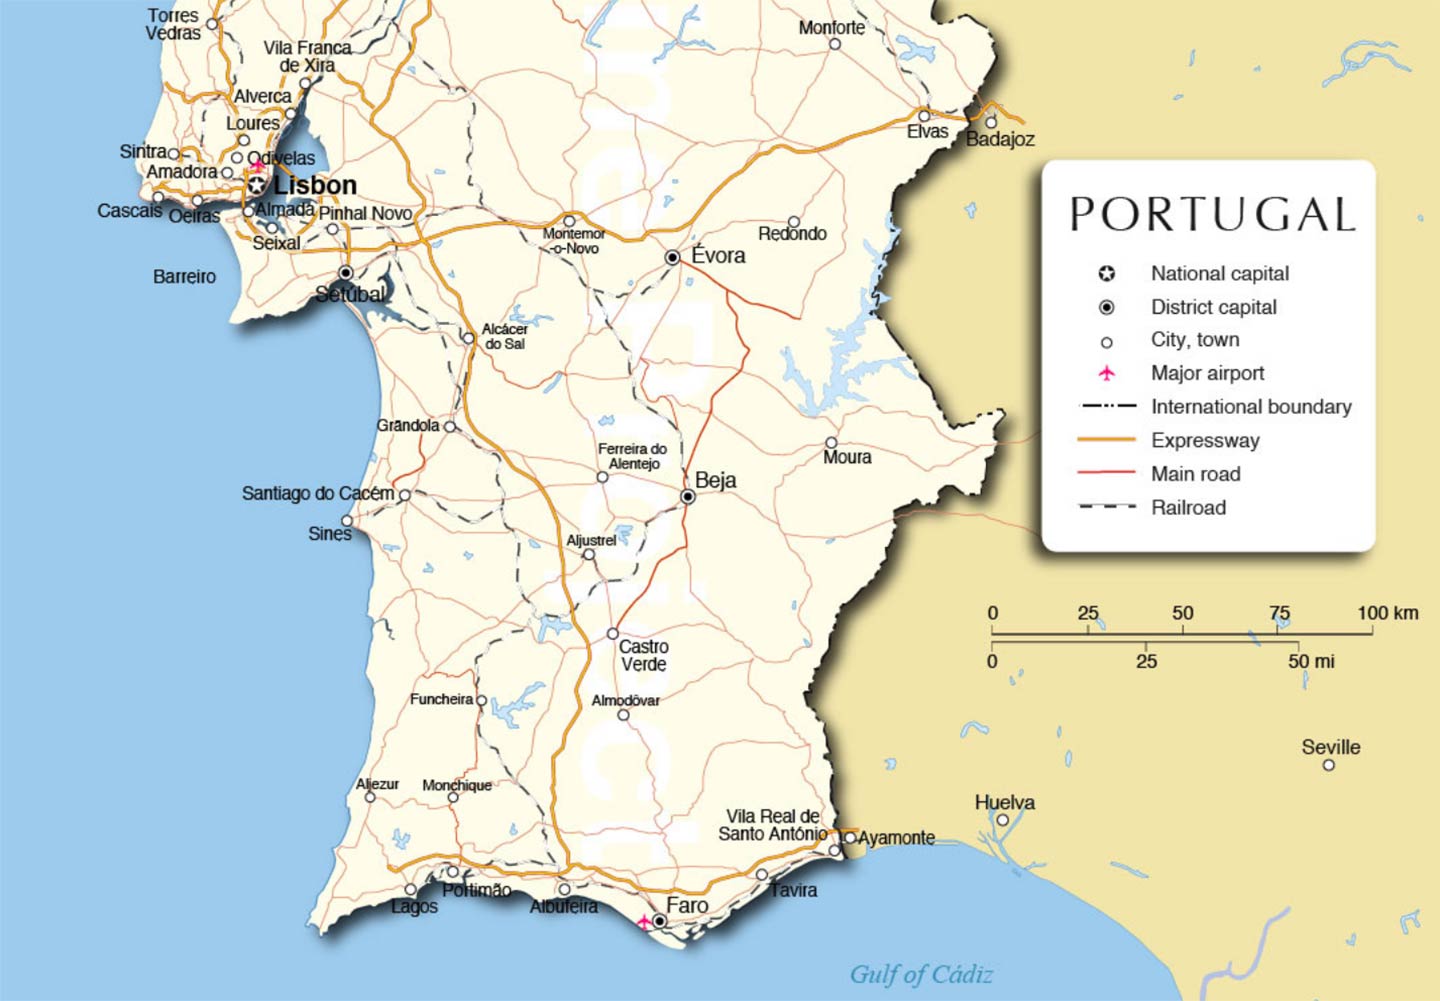 Portugal - A Country Profile - Nations Online Project